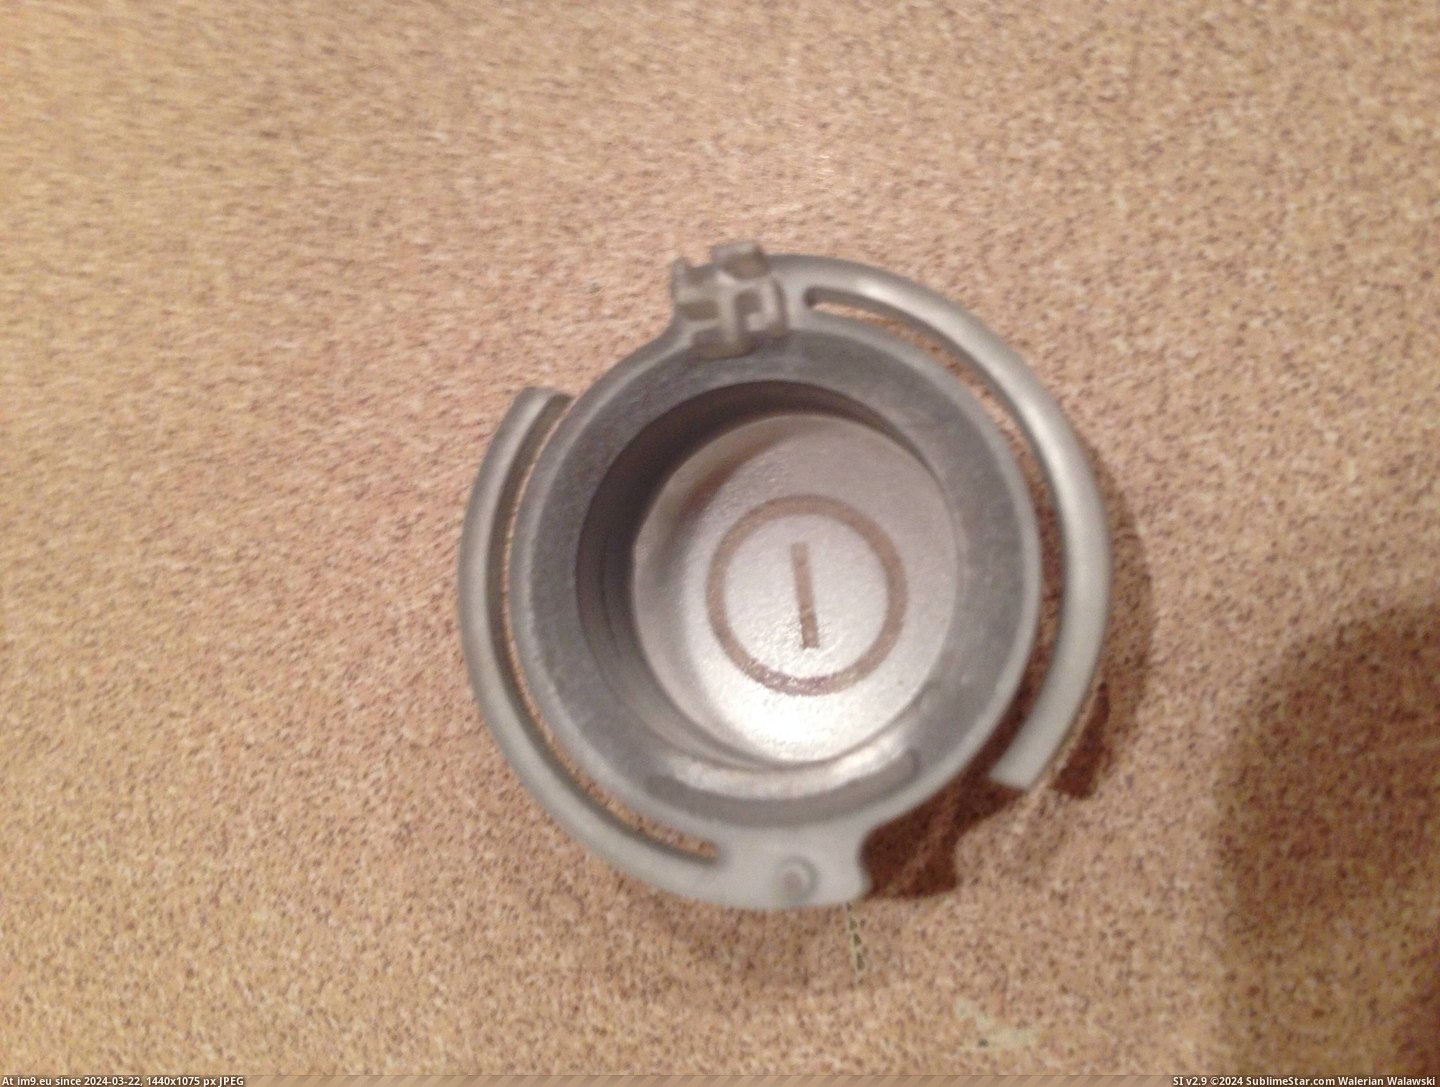 #Power #Button #Swastika #Dryer #Backside [Mildlyinteresting] There is a swastika on the backside of the power button for my dryer. Pic. (Изображение из альбом My r/MILDLYINTERESTING favs))